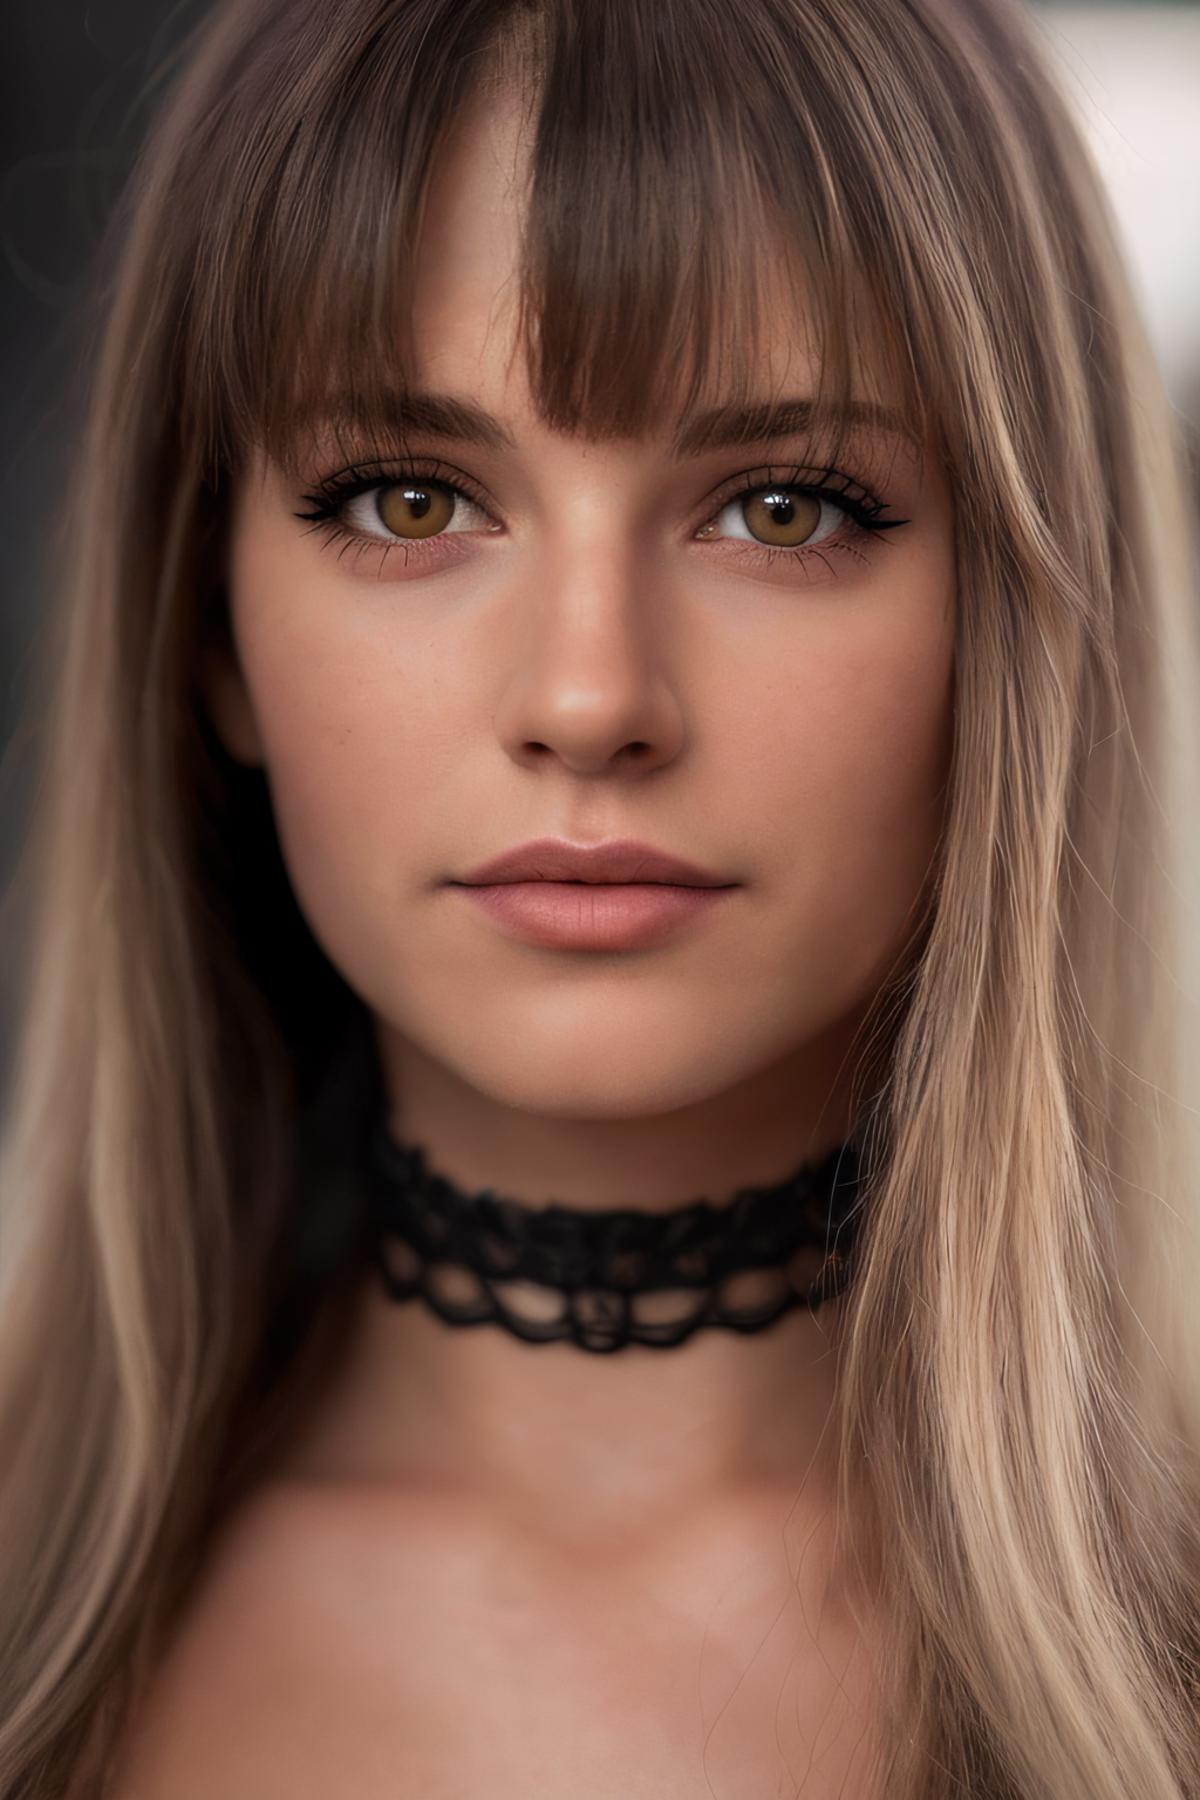 AI model image by Clearwavey